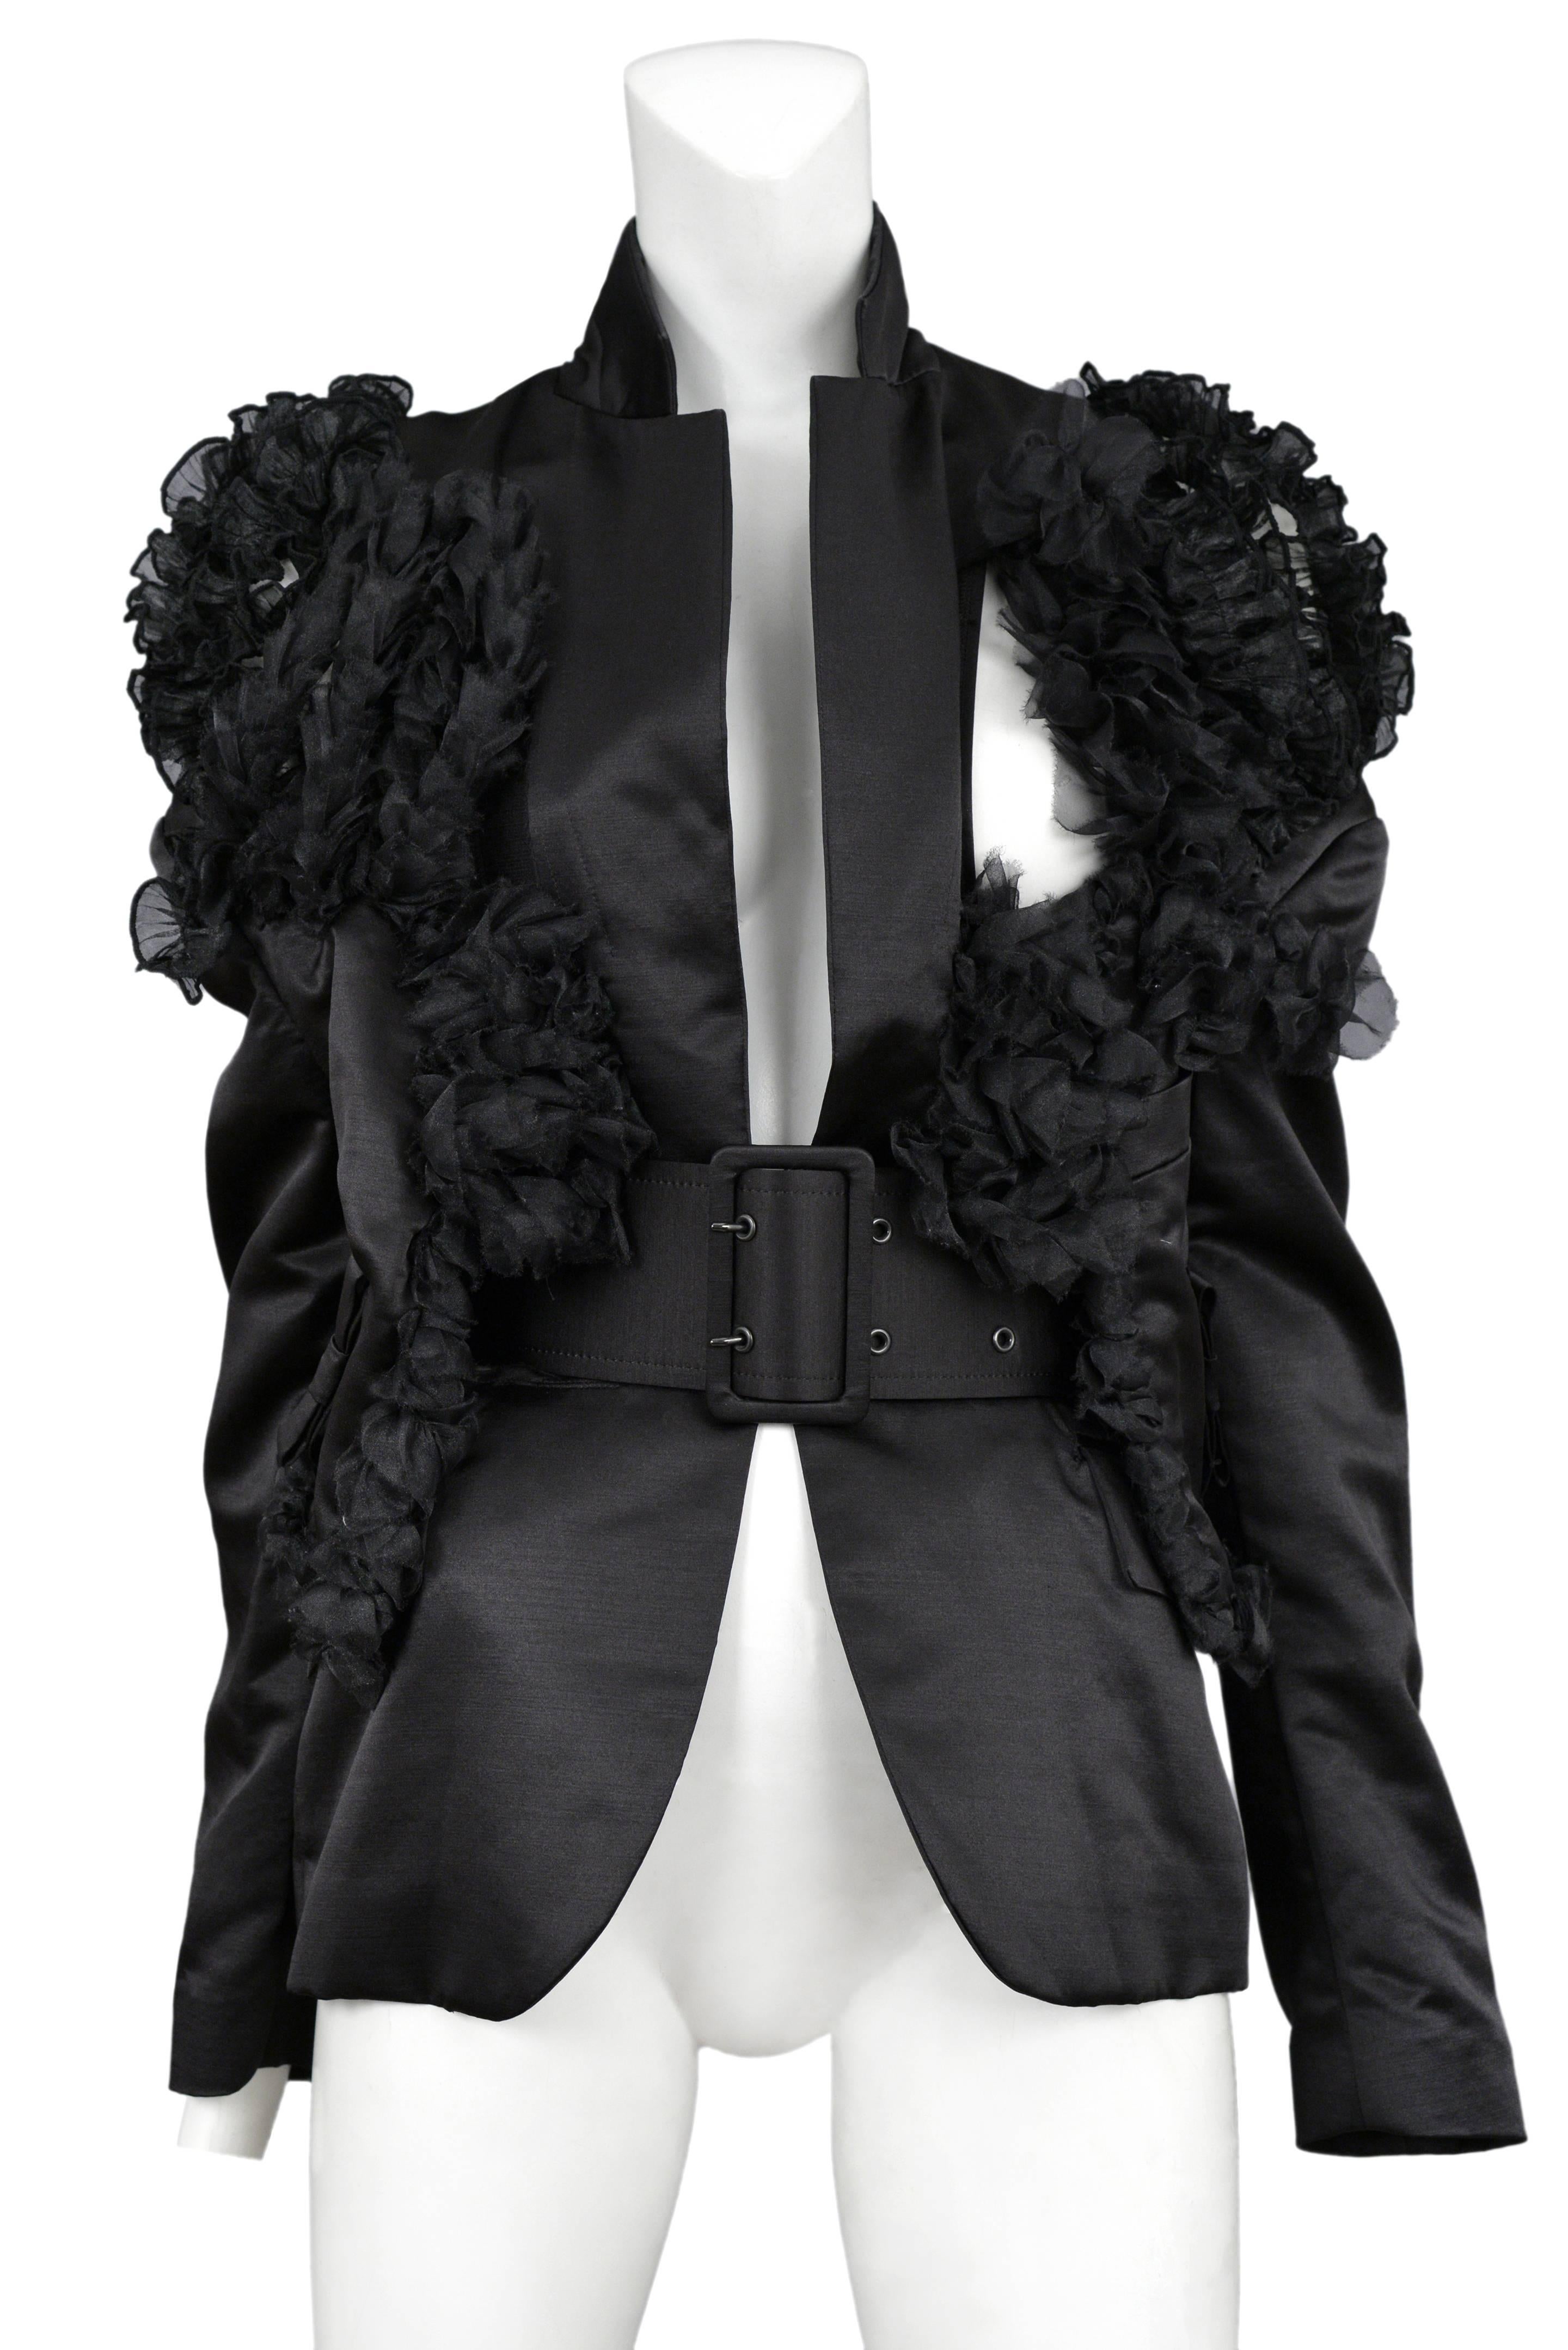 Vintage Comme des Garcons black satin pointed lapel blazer featuring ruffle organza detailing at the shoulders and torso and a matching wide buckle satin belt. Circa Spring /  Summer 2007.
Please inquire for additional images.